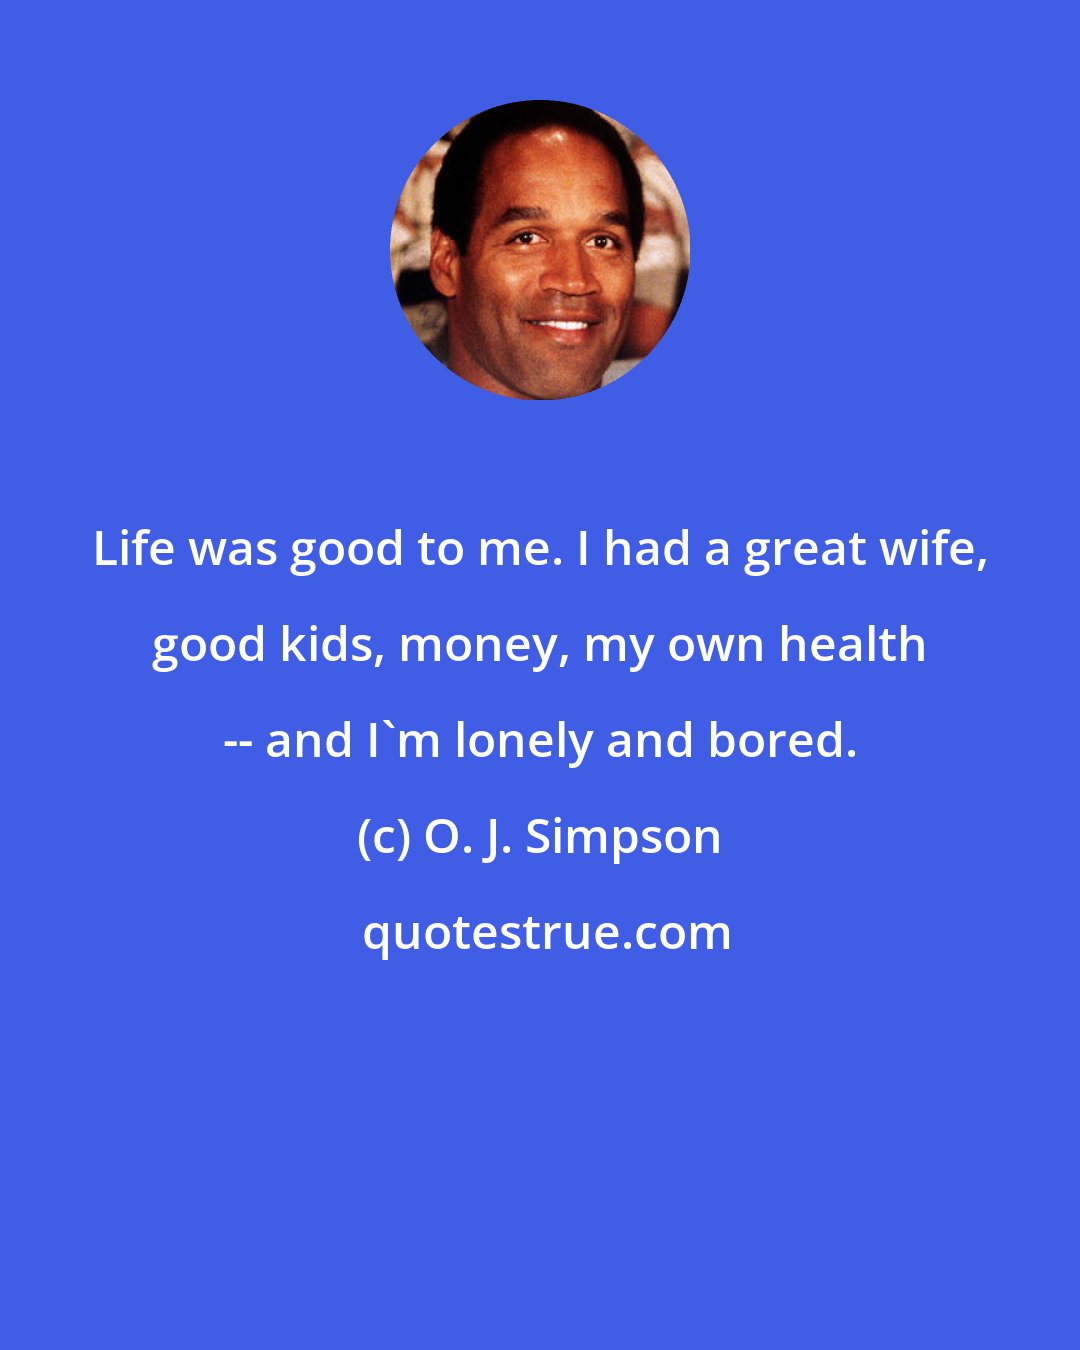 O. J. Simpson: Life was good to me. I had a great wife, good kids, money, my own health -- and I'm lonely and bored.